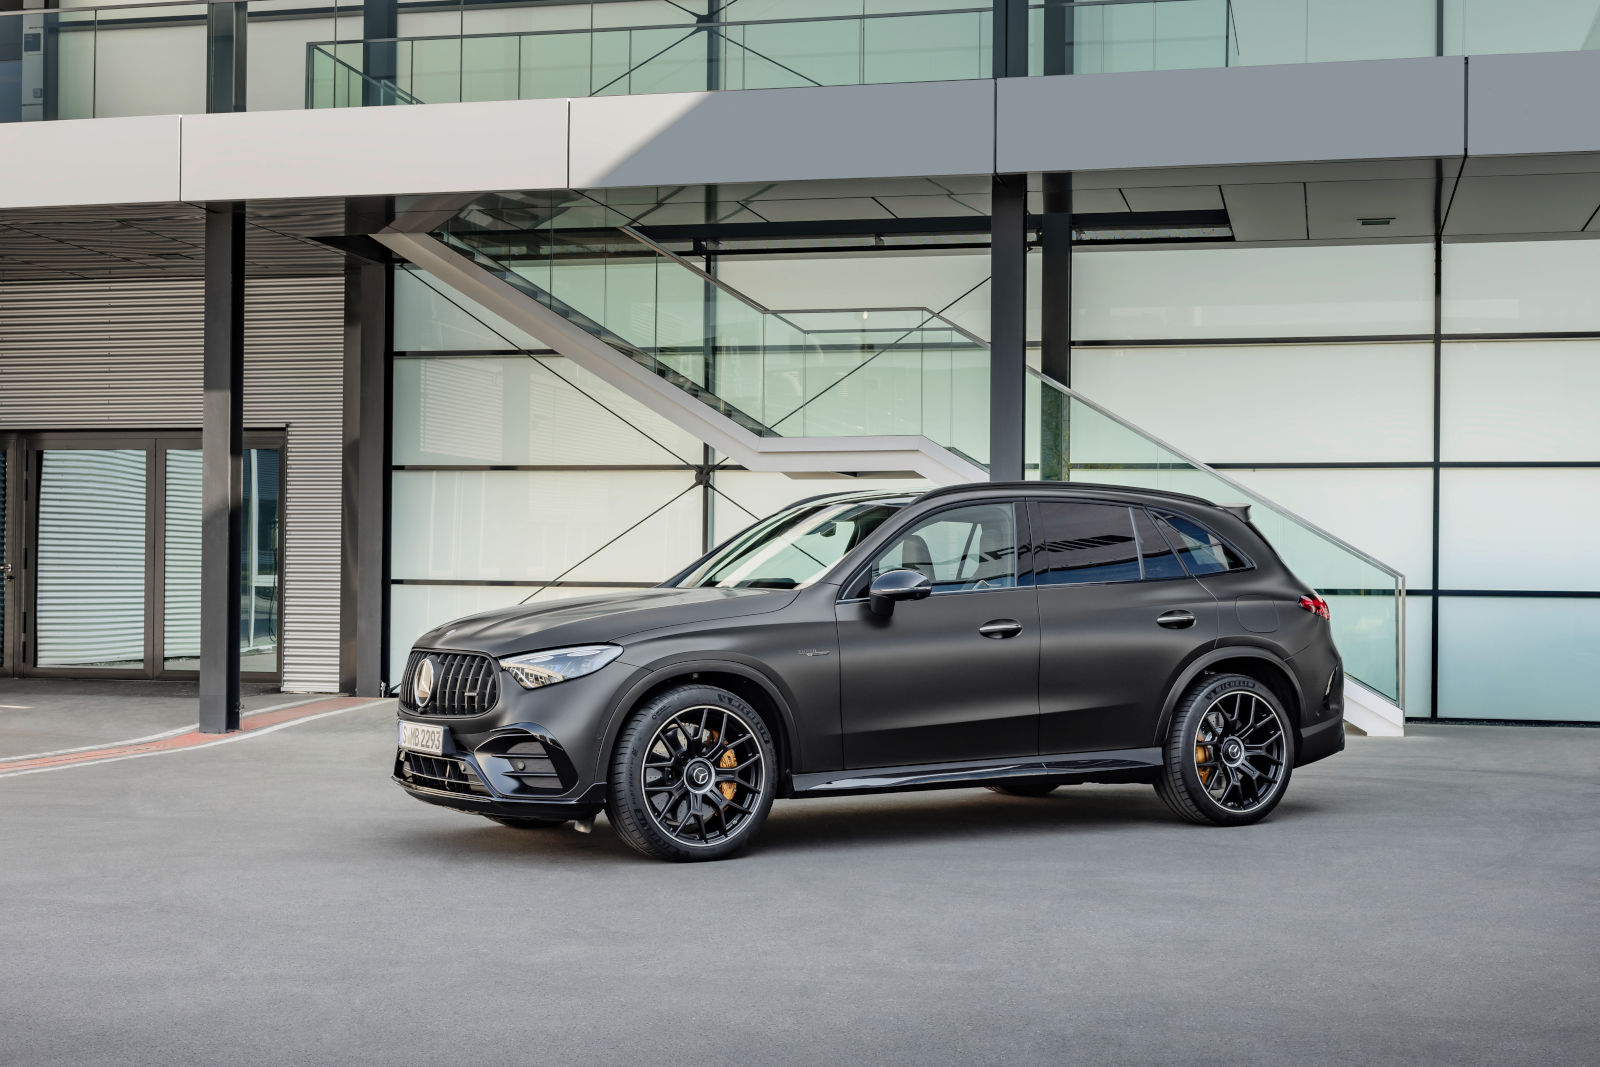 What to Know About the New 2023 Mercedes-AMG GLC